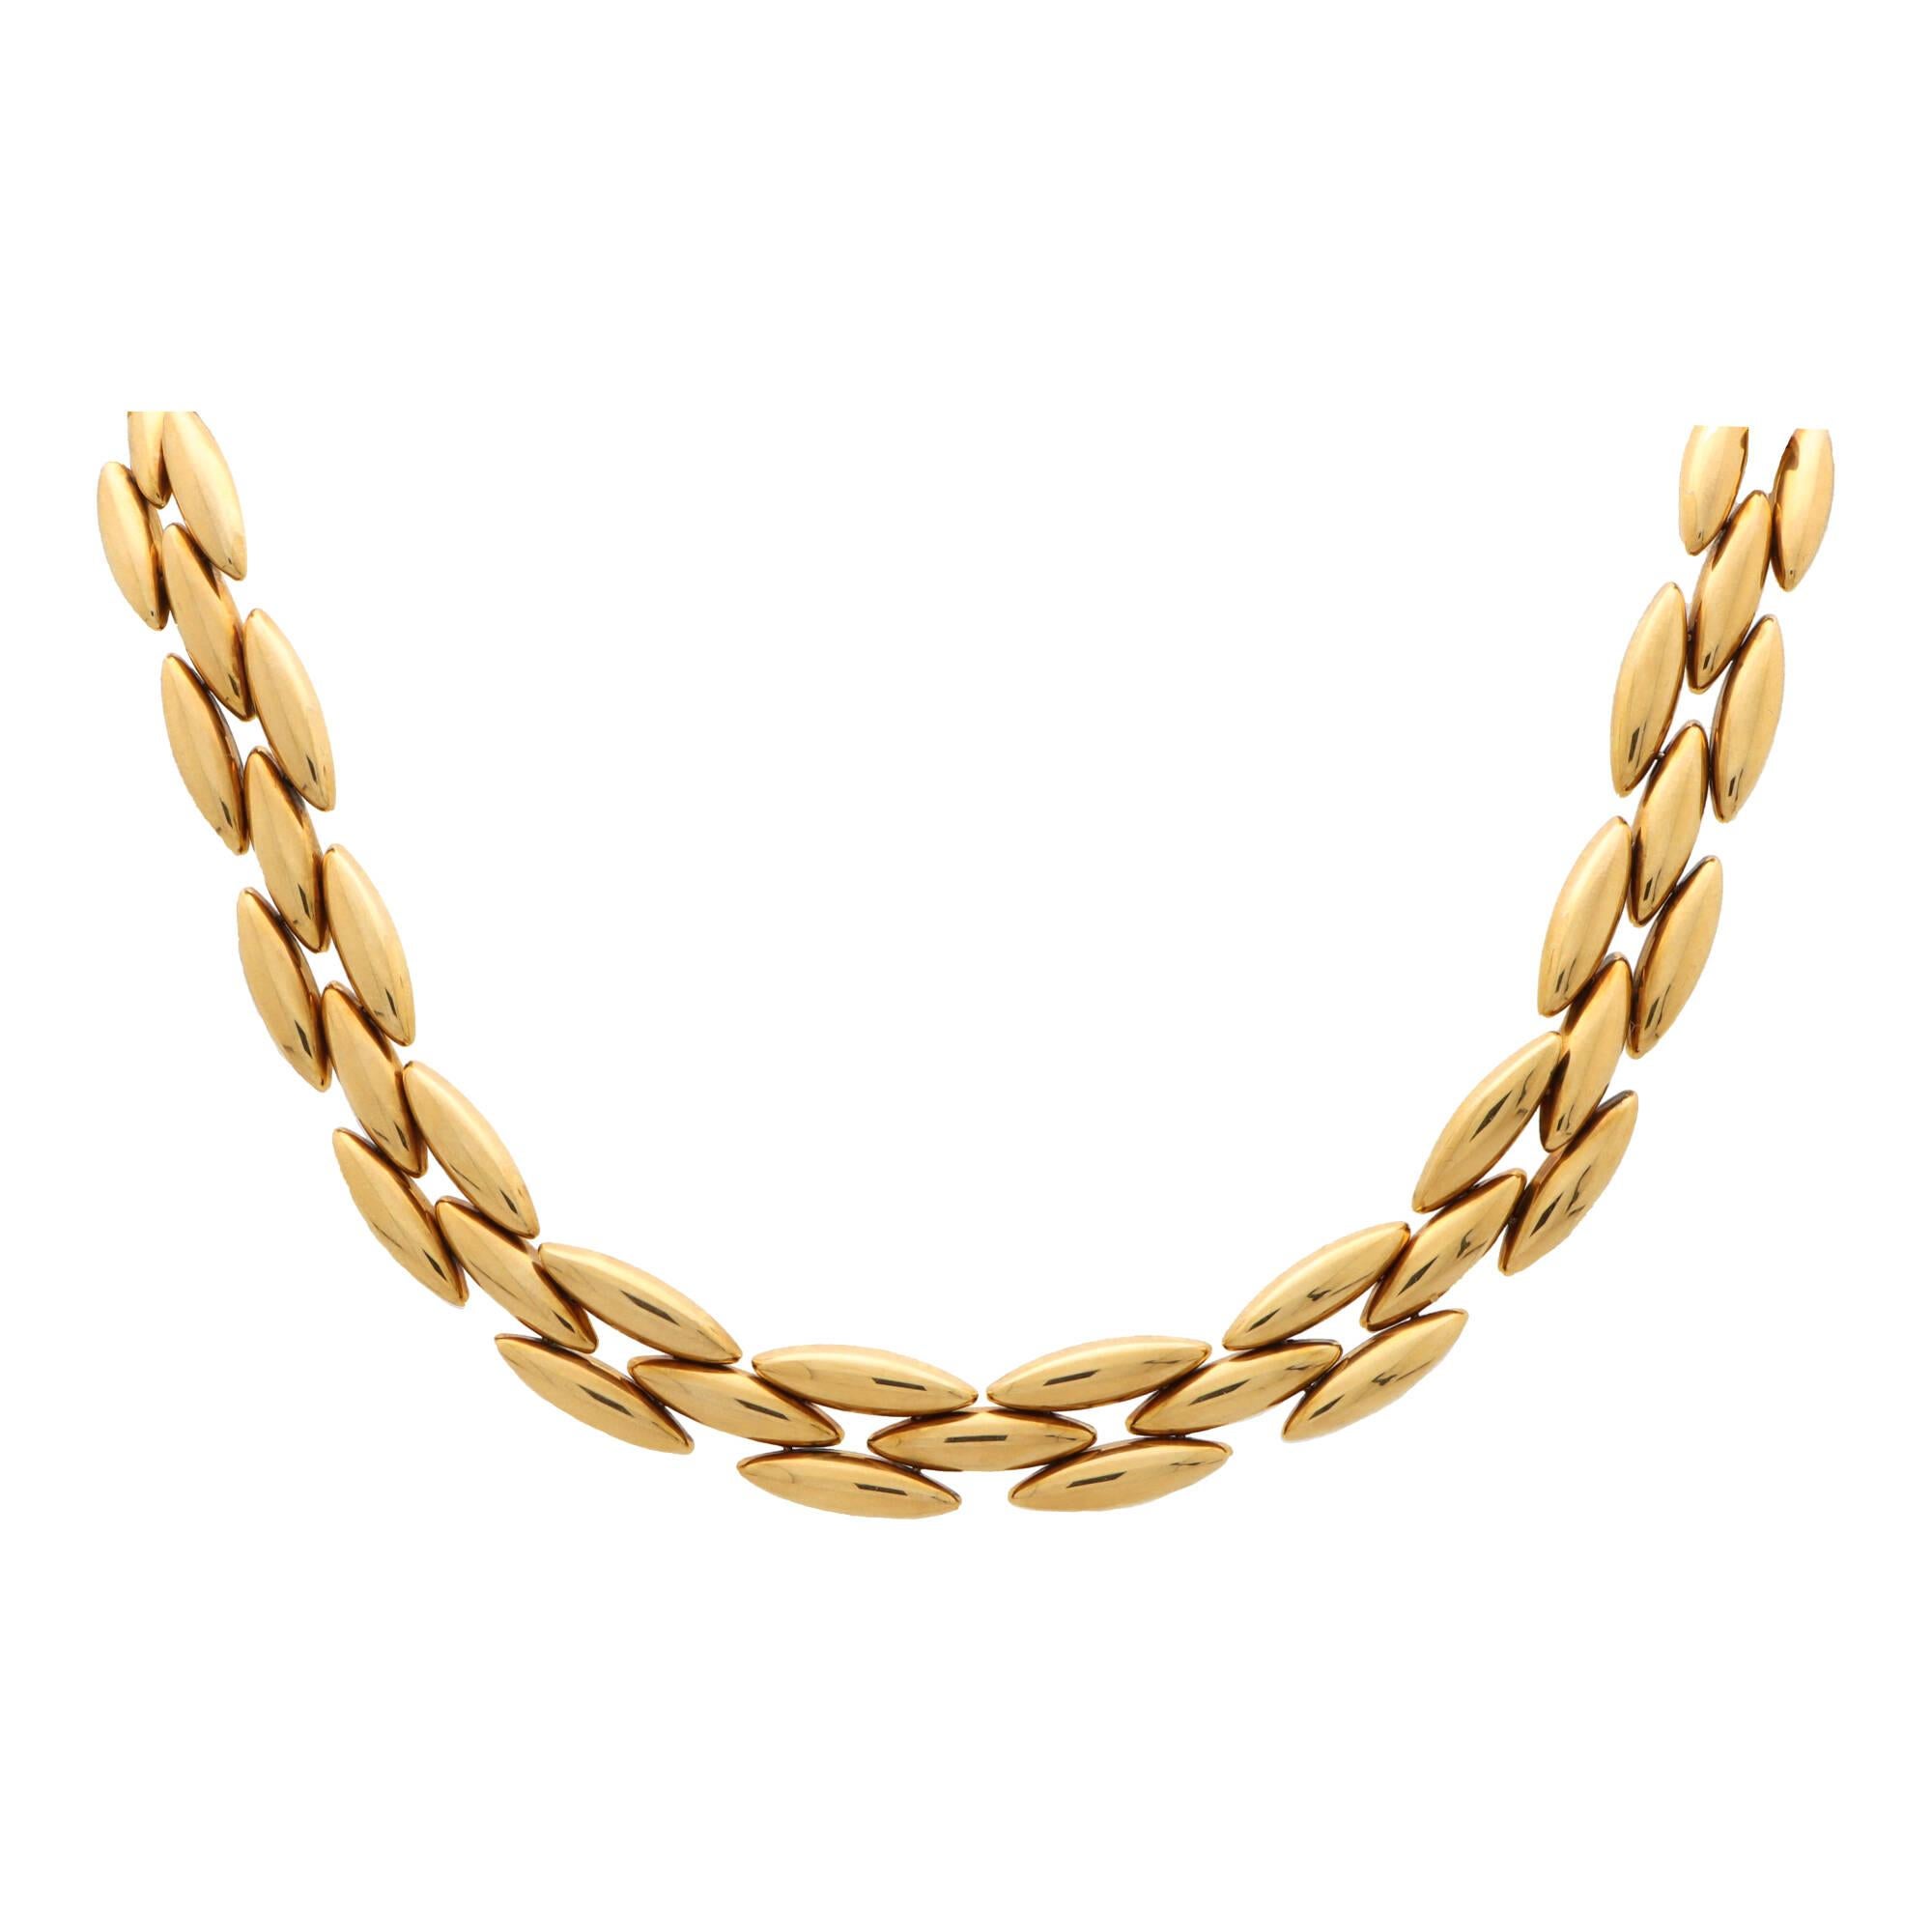 A vintage Cartier ‘Gentiane’ oval link necklace set in 18k yellow gold.

Form the discontinued 1990’s ‘Gentiane’ collection, the necklace is composed of a 60 individual pointed oval links; all of which are articulated to move freely on the neck. The